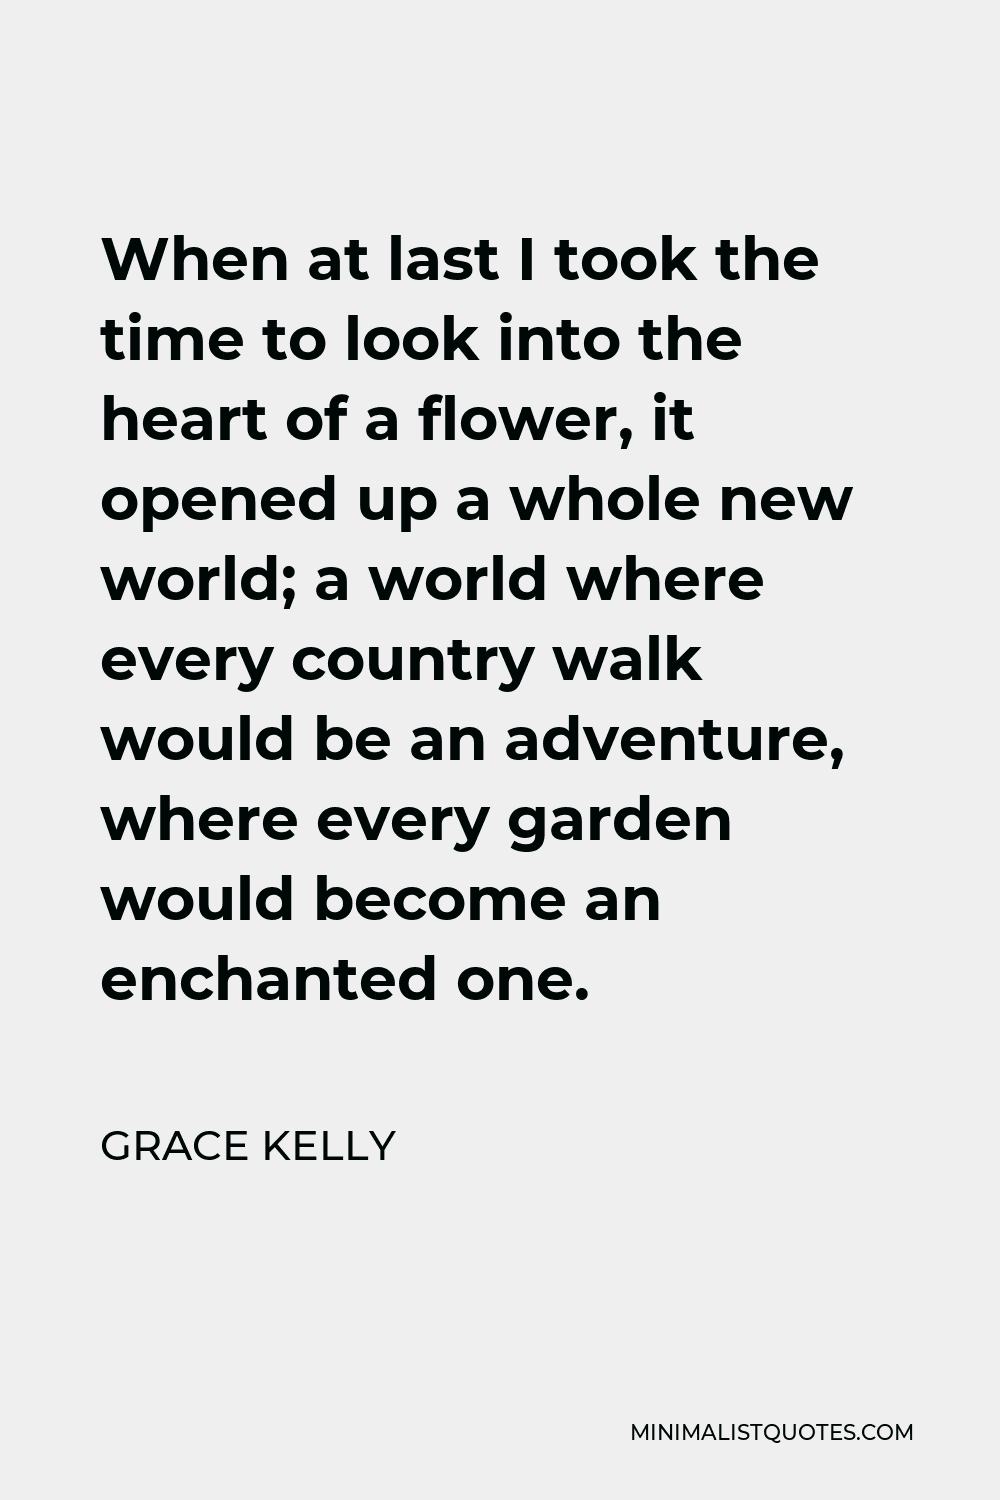 Grace Kelly Quote - When at last I took the time to look into the heart of a flower, it opened up a whole new world; a world where every country walk would be an adventure, where every garden would become an enchanted one.